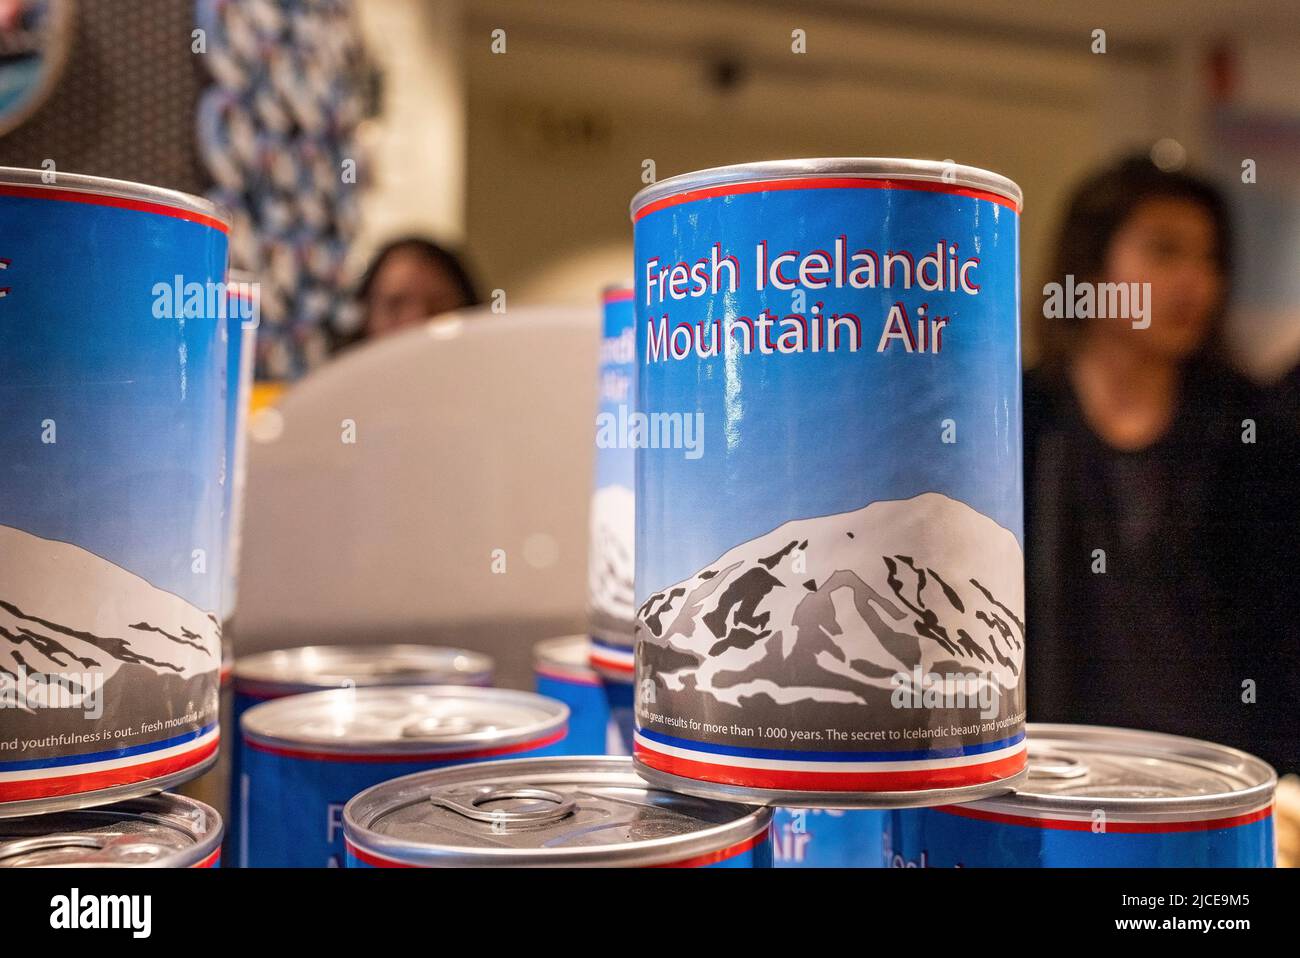 Pile of fresh Icelandic mountain air cans in shops at Alpine region Stock Photo